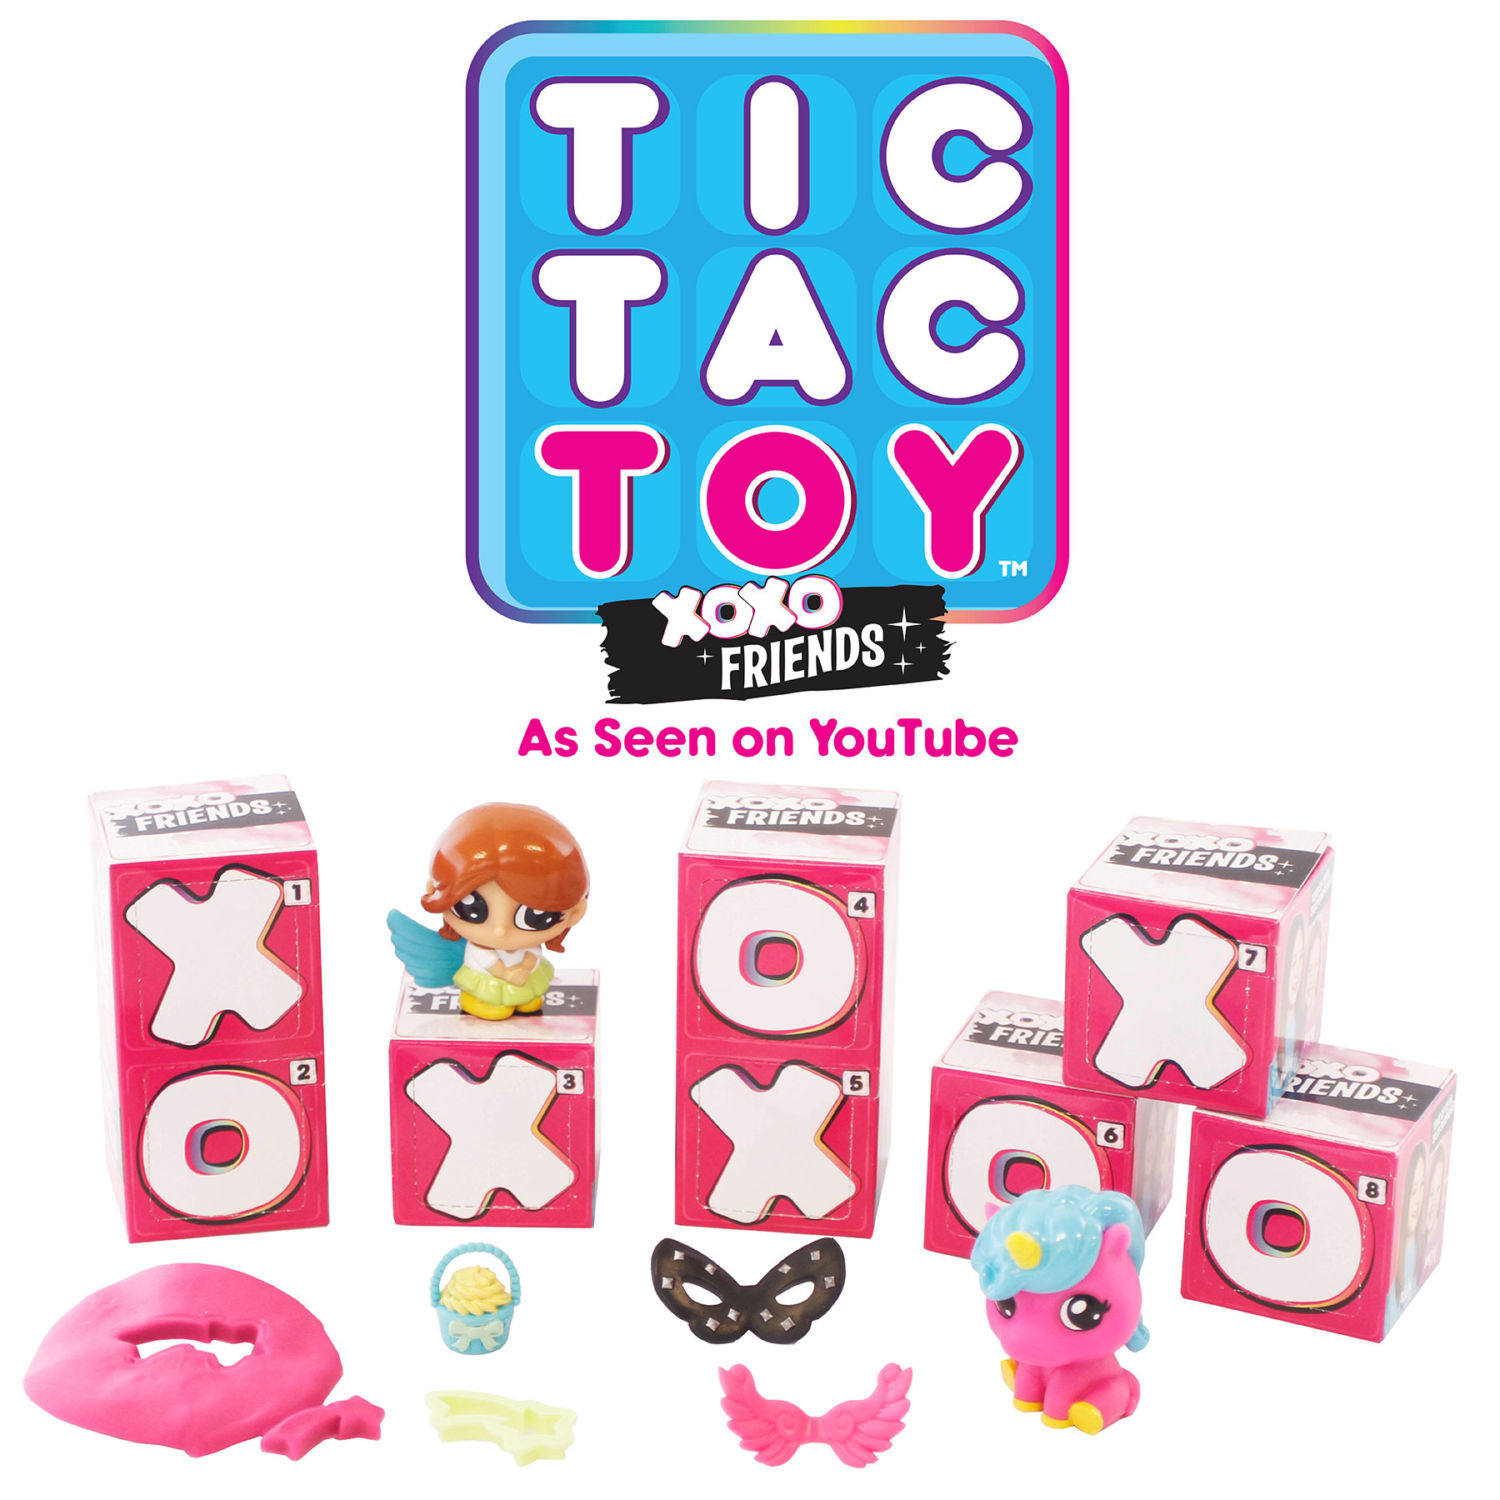 Tic Tac Toy XOXO Friends New Surprise Pack 4 Addy Maya Youtube Surprises Boxes 